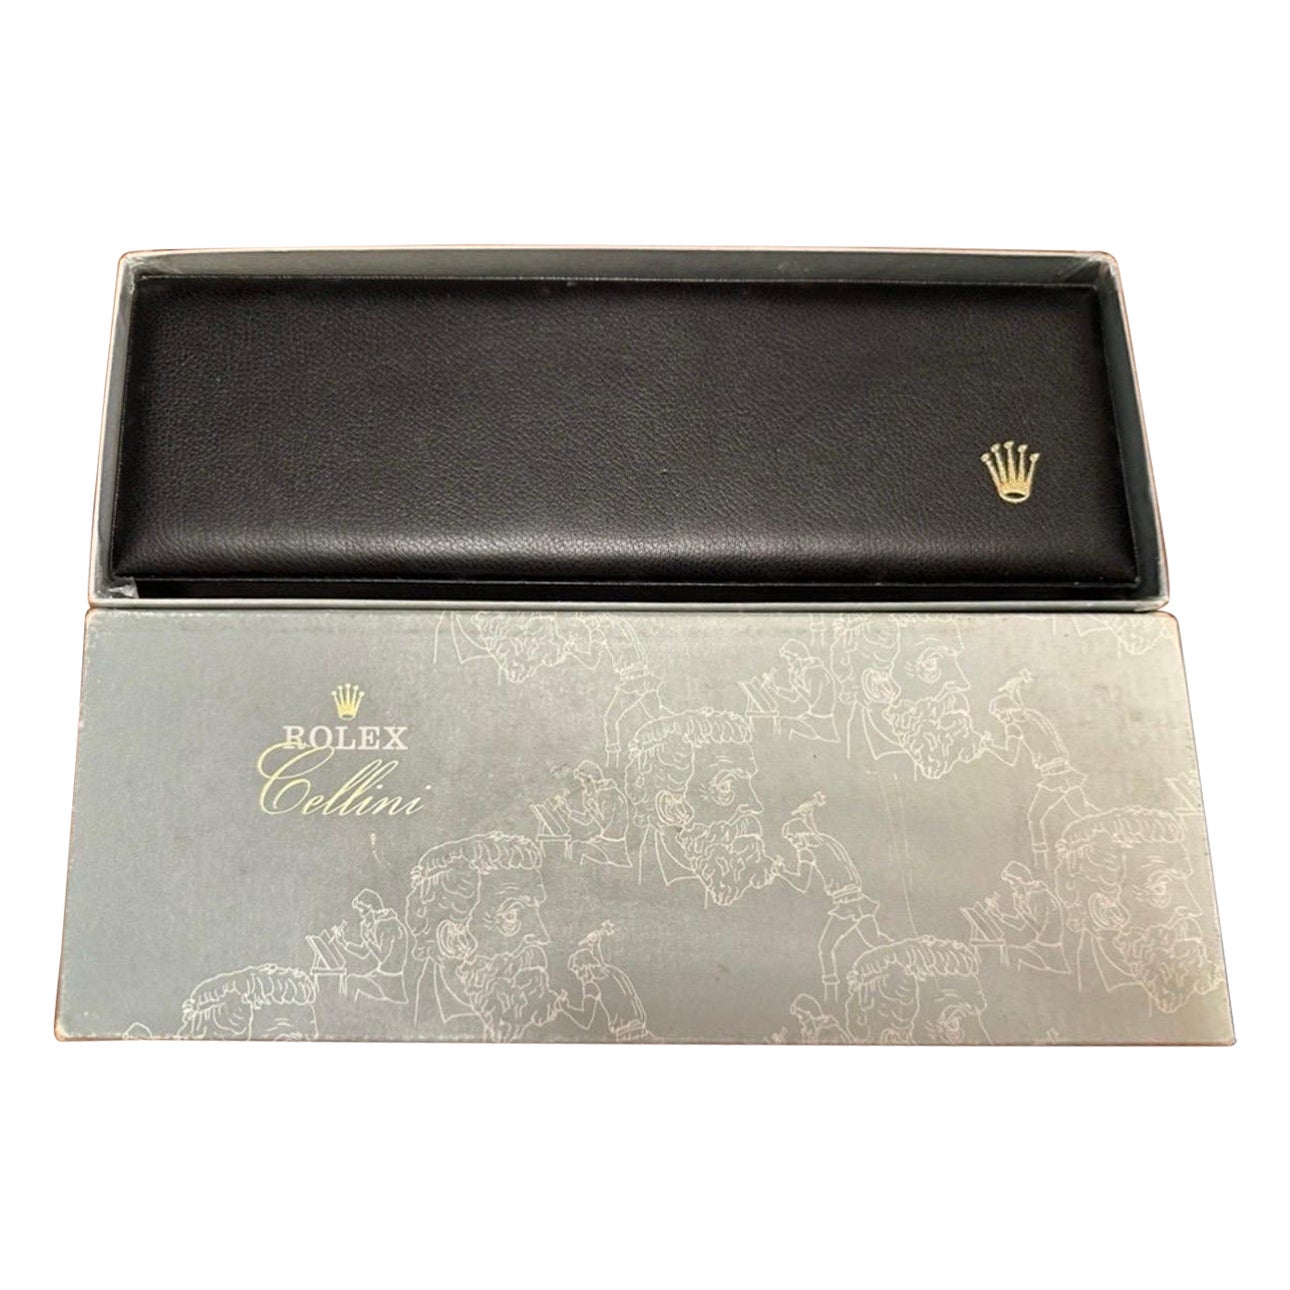 Rolex Cellini watch box complete with outer box. Black leather cream inside new For Sale